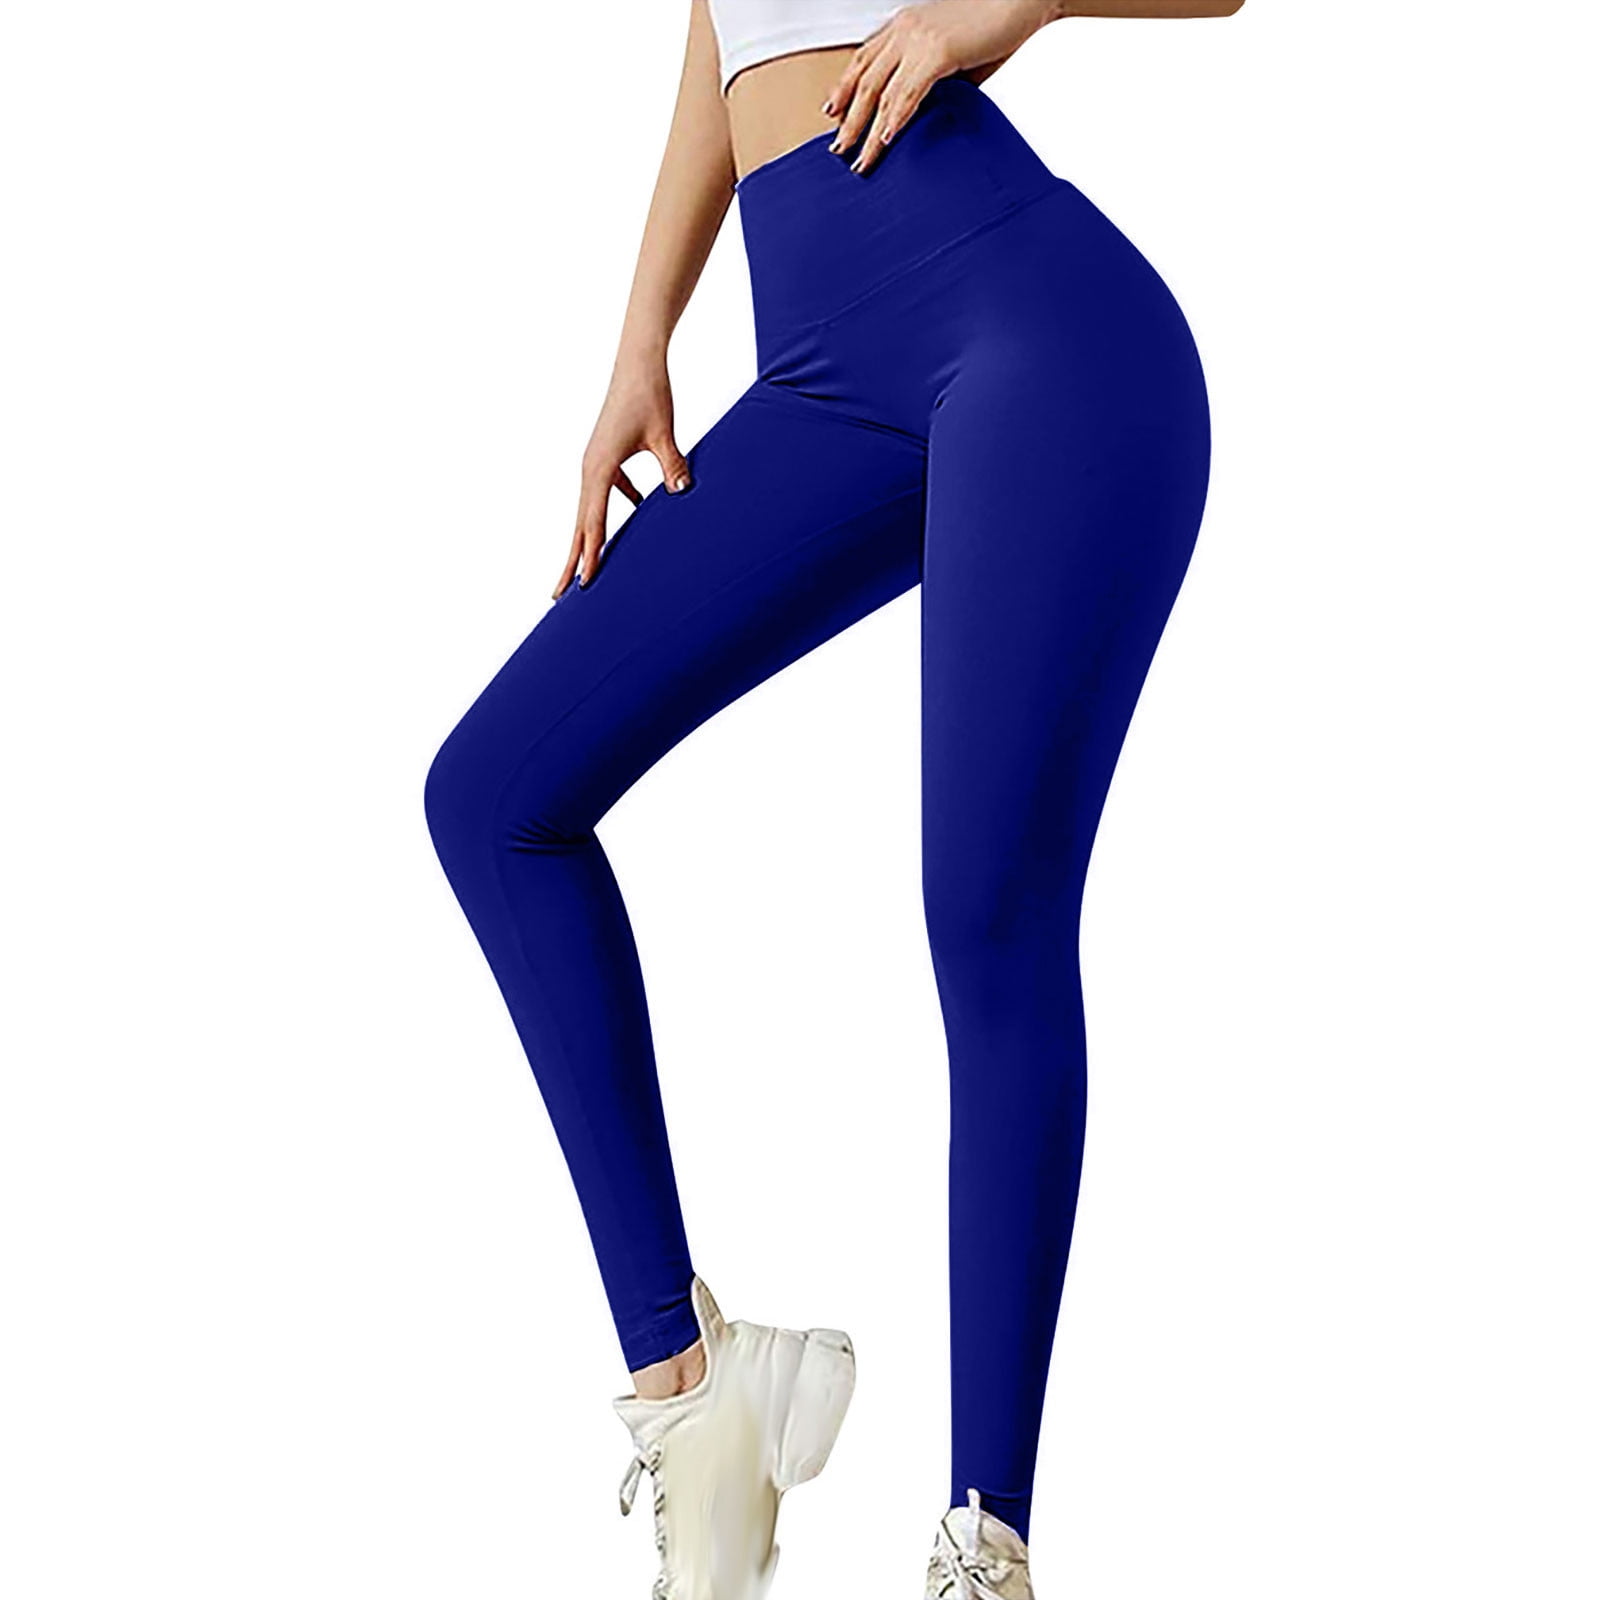  Women's High Waist Leggings Fitness Workout Tight Butt Sports Pants  Yoga Pants for Gym, Yoga, Running (Color : Royal Blue, Size : M) :  Clothing, Shoes & Jewelry